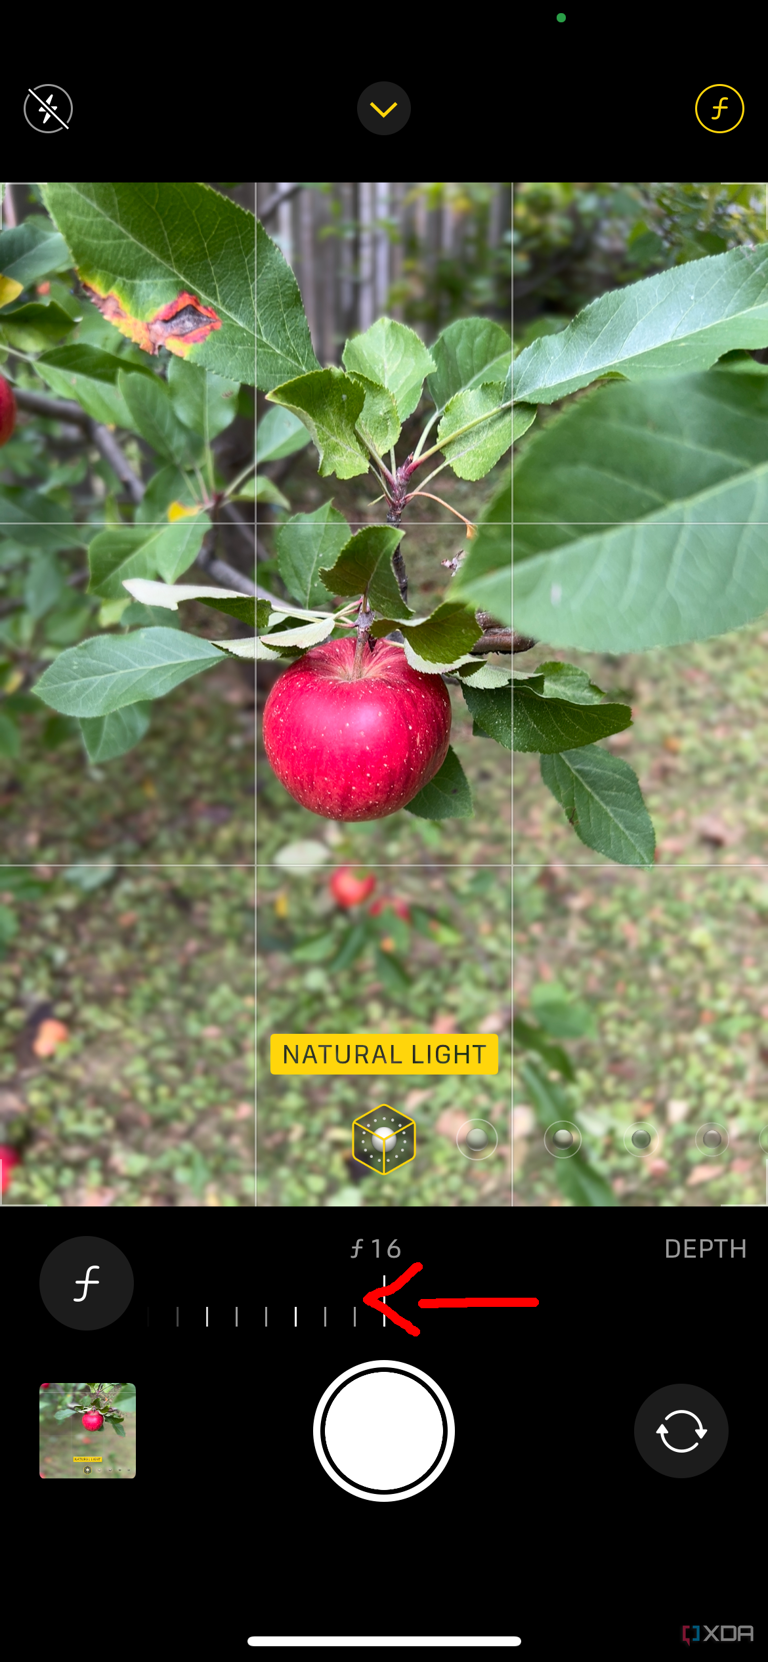 iPhone camera app open taking a photo of an apple with the depth control slider on and an arrow pointing to the left.